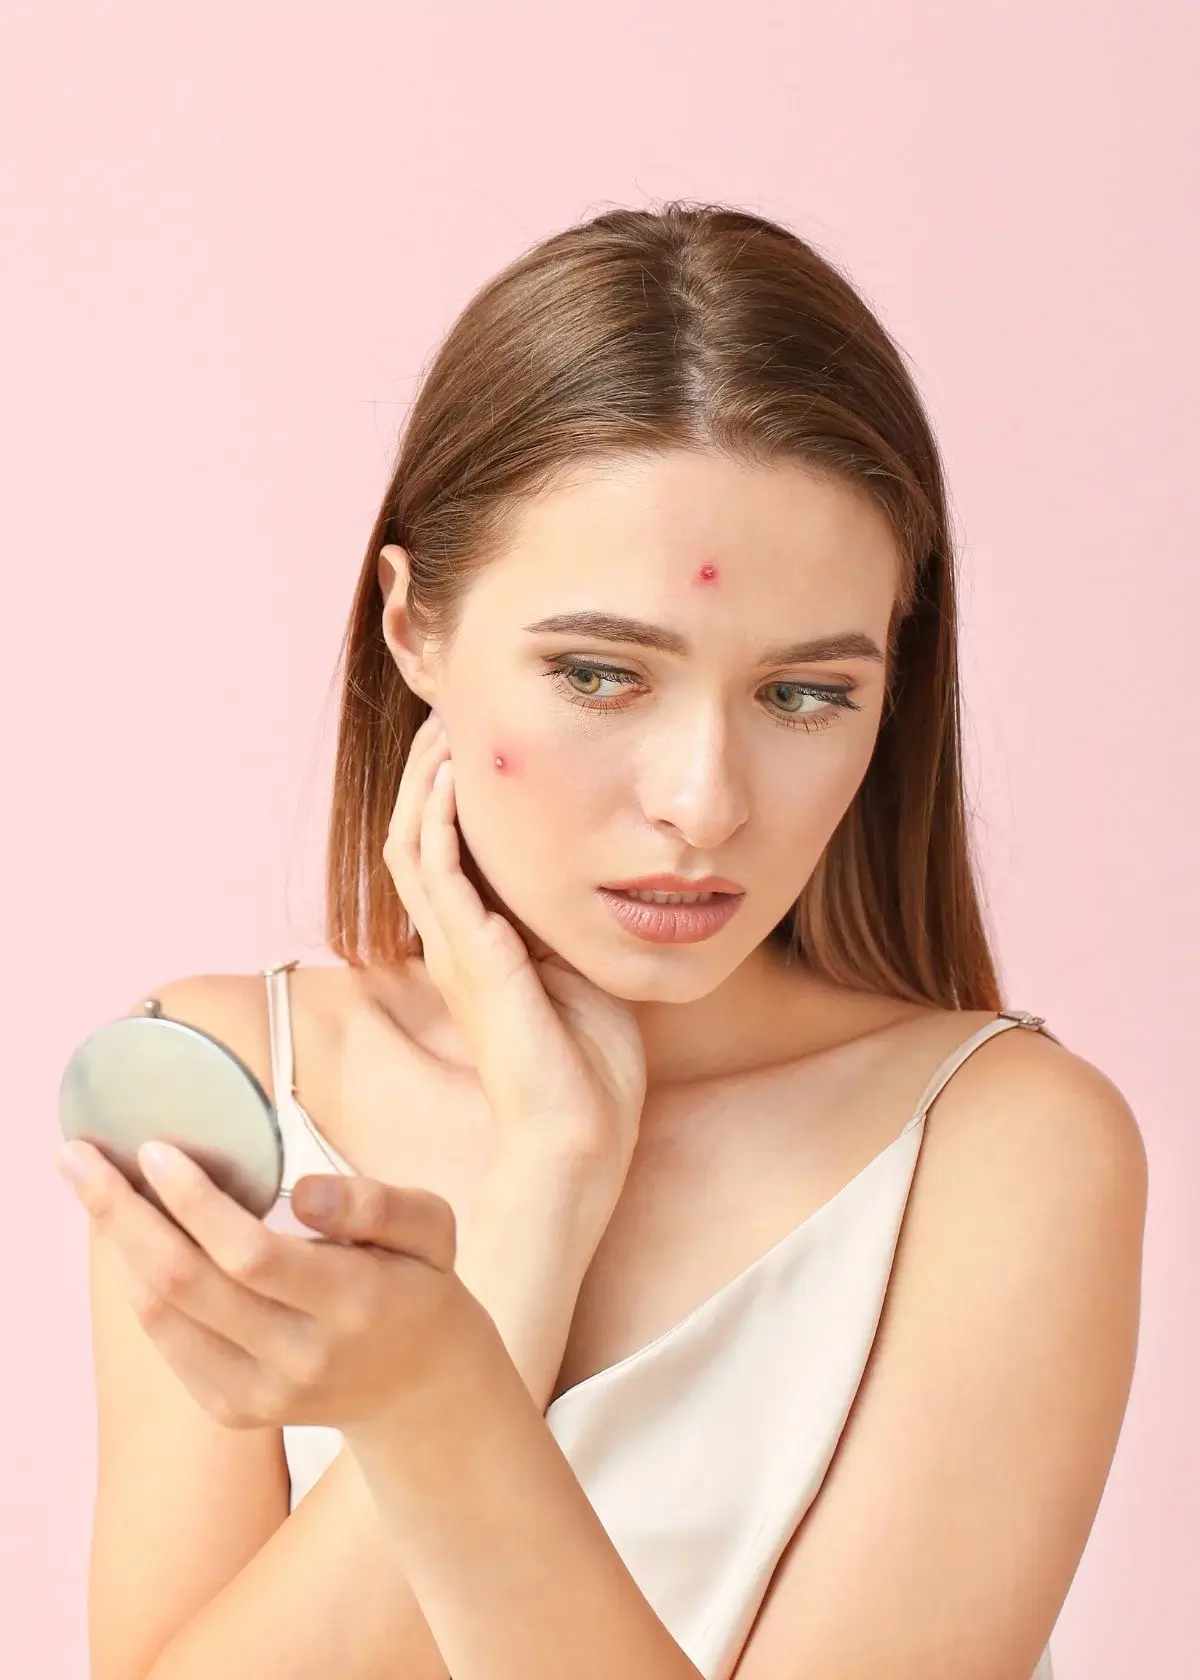 How to choose the right acne treatment?